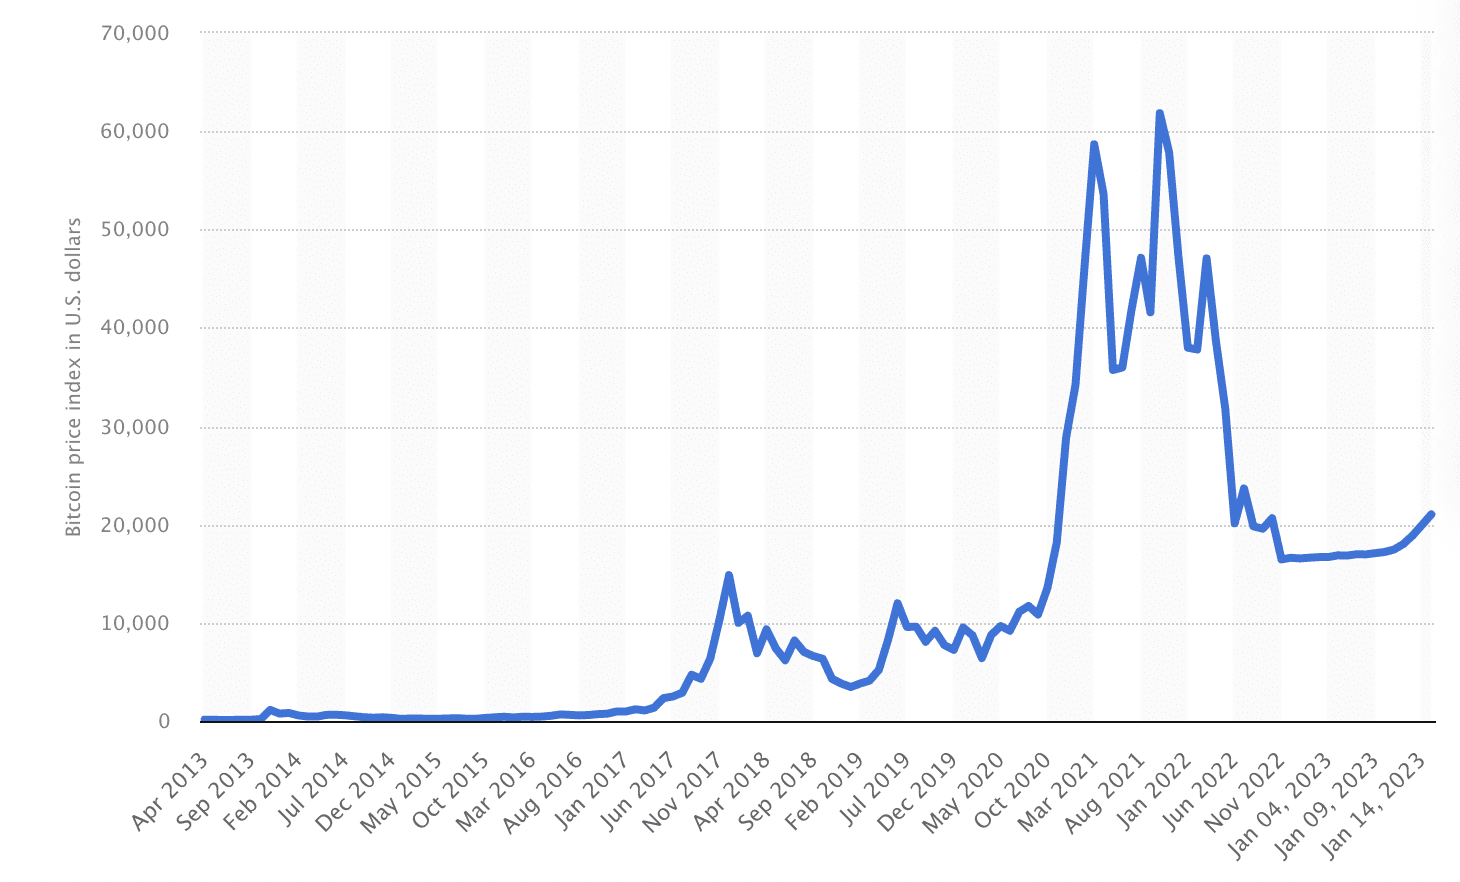 Bitcoin price chart over time